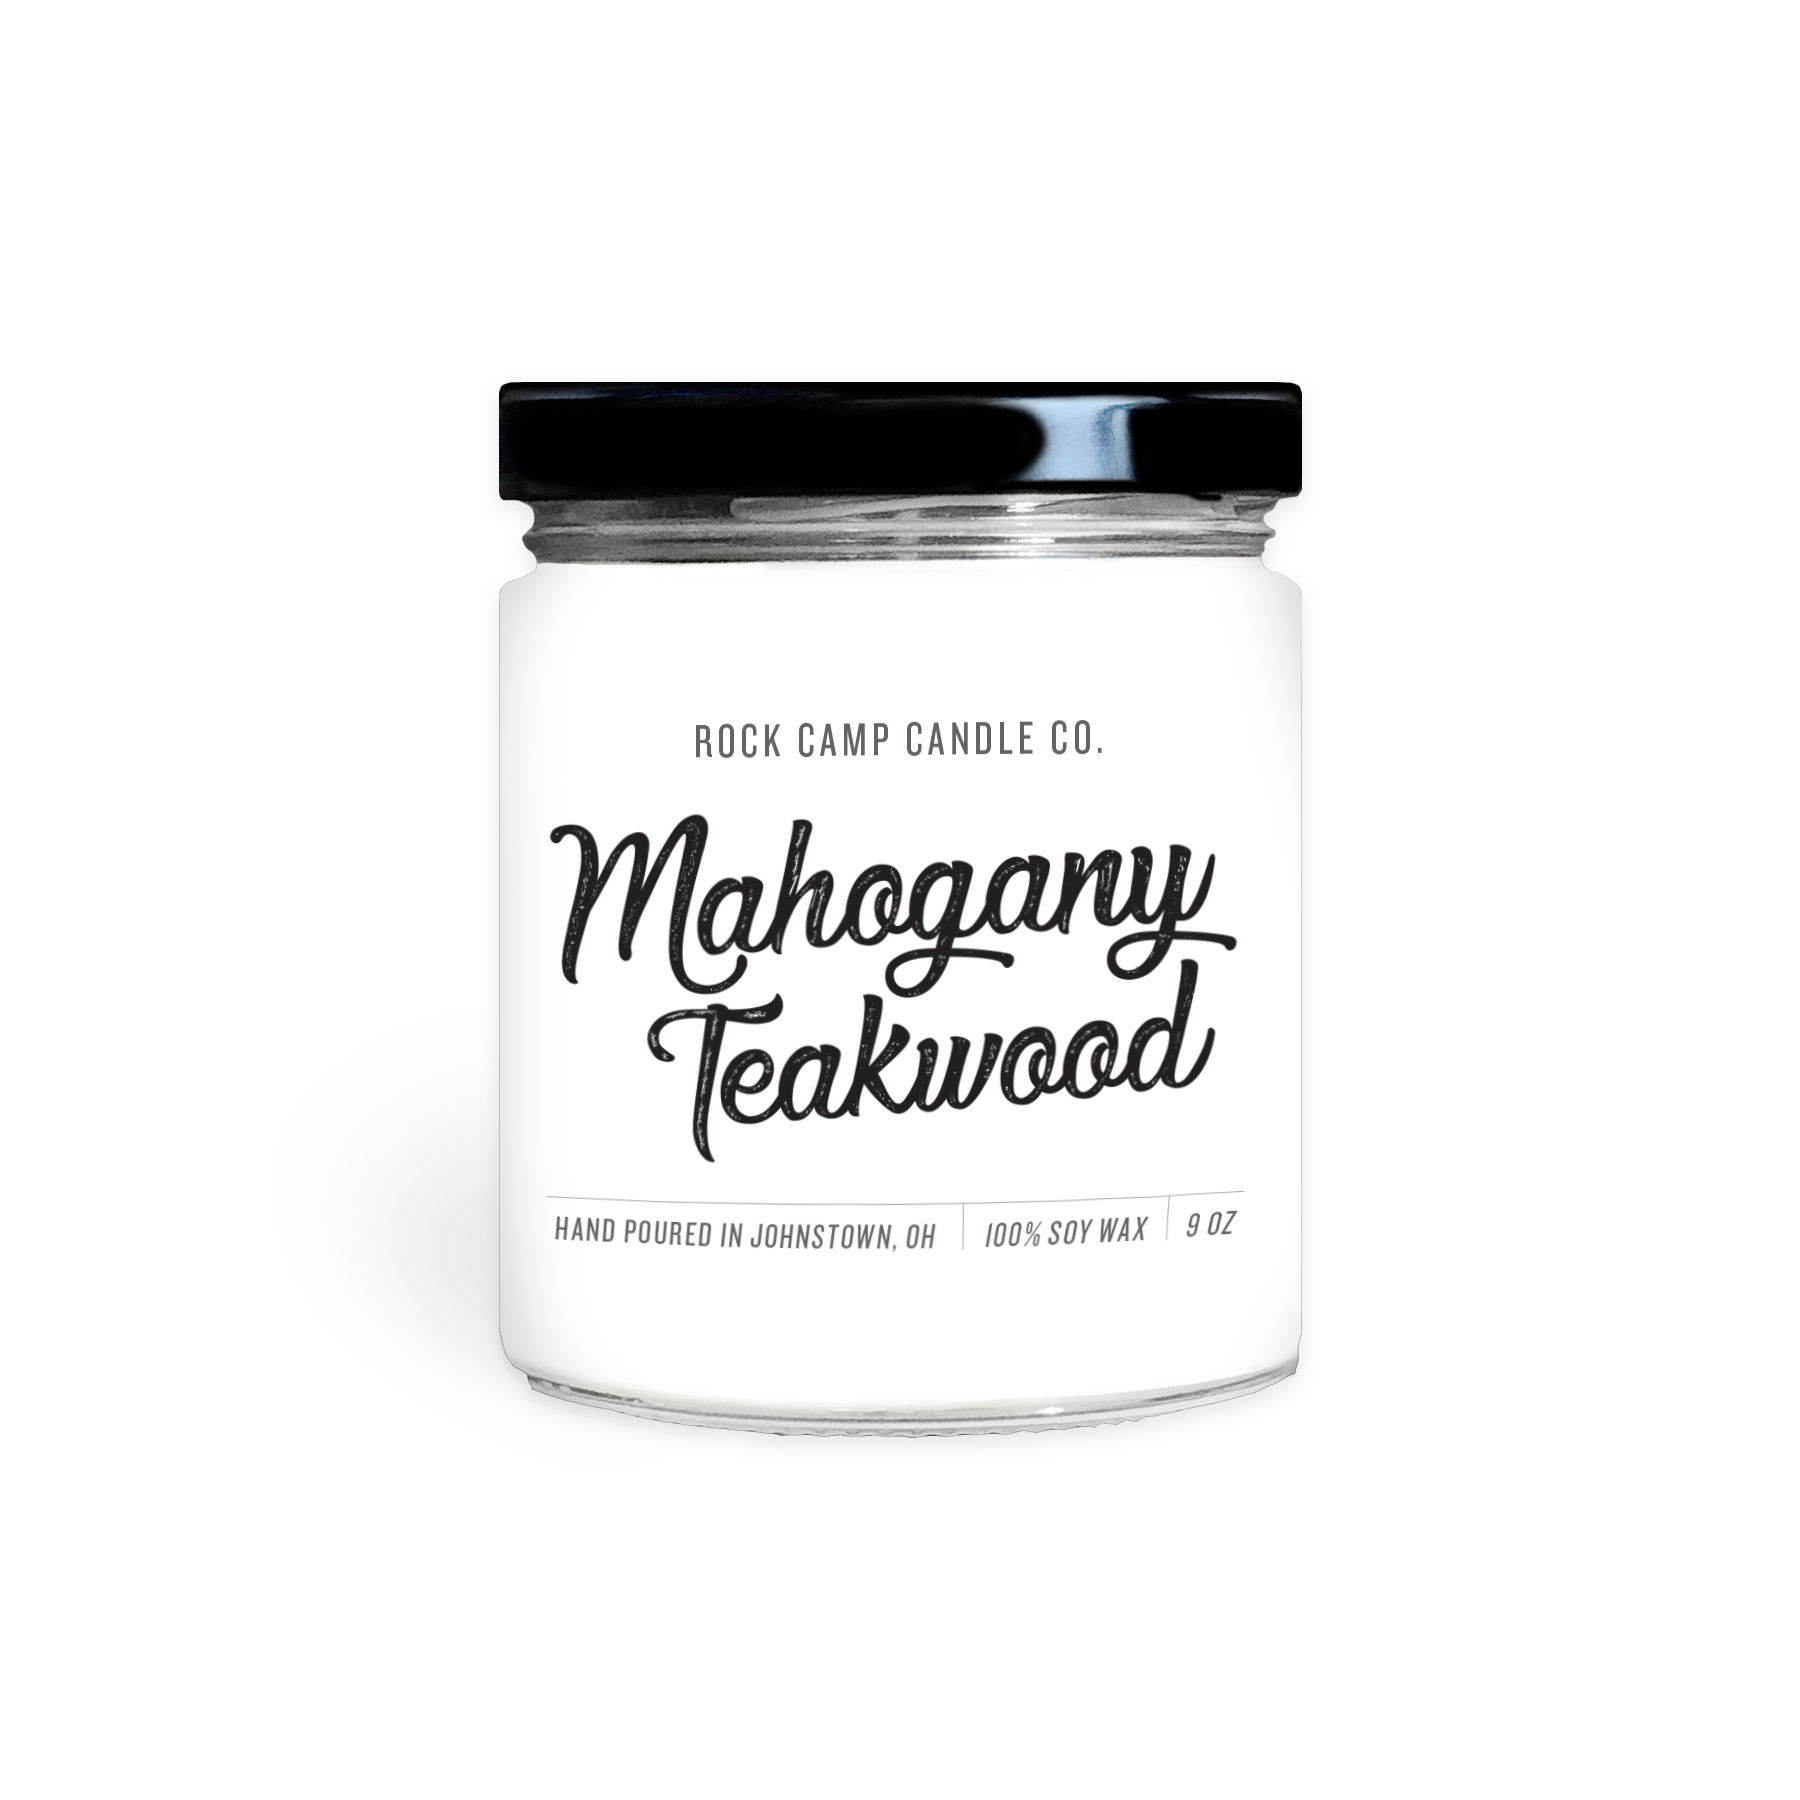 Mahogany Teakwood candles and home fragrances – The Columbia Fragrance Co.